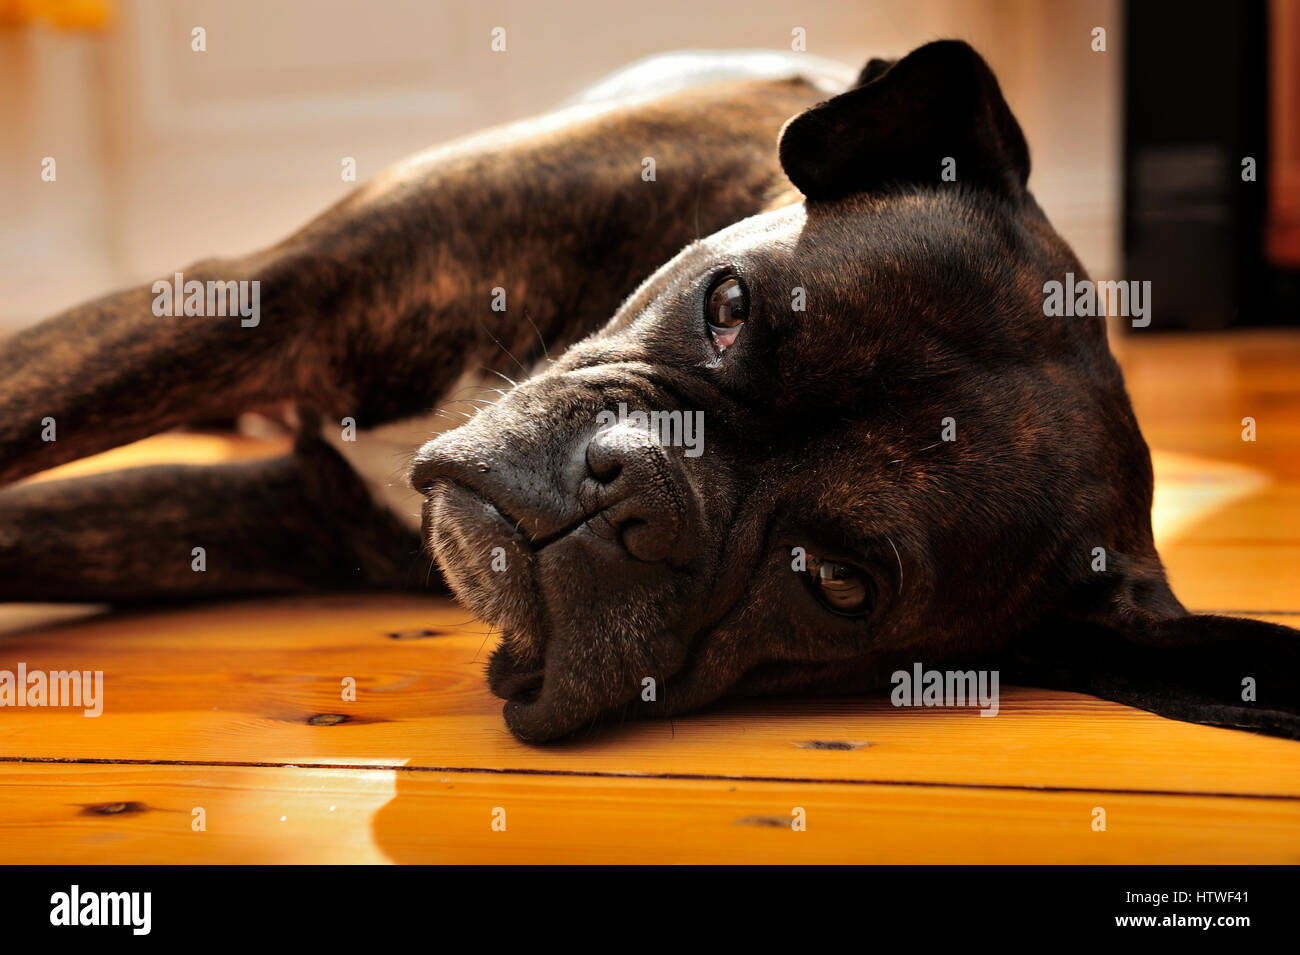 adorable, animal, background, big, black, boxer, breed, brown, canine, close, close-up, cut, cute, dog, doggy, domestic, eye, face, friend, front, Stock Photo